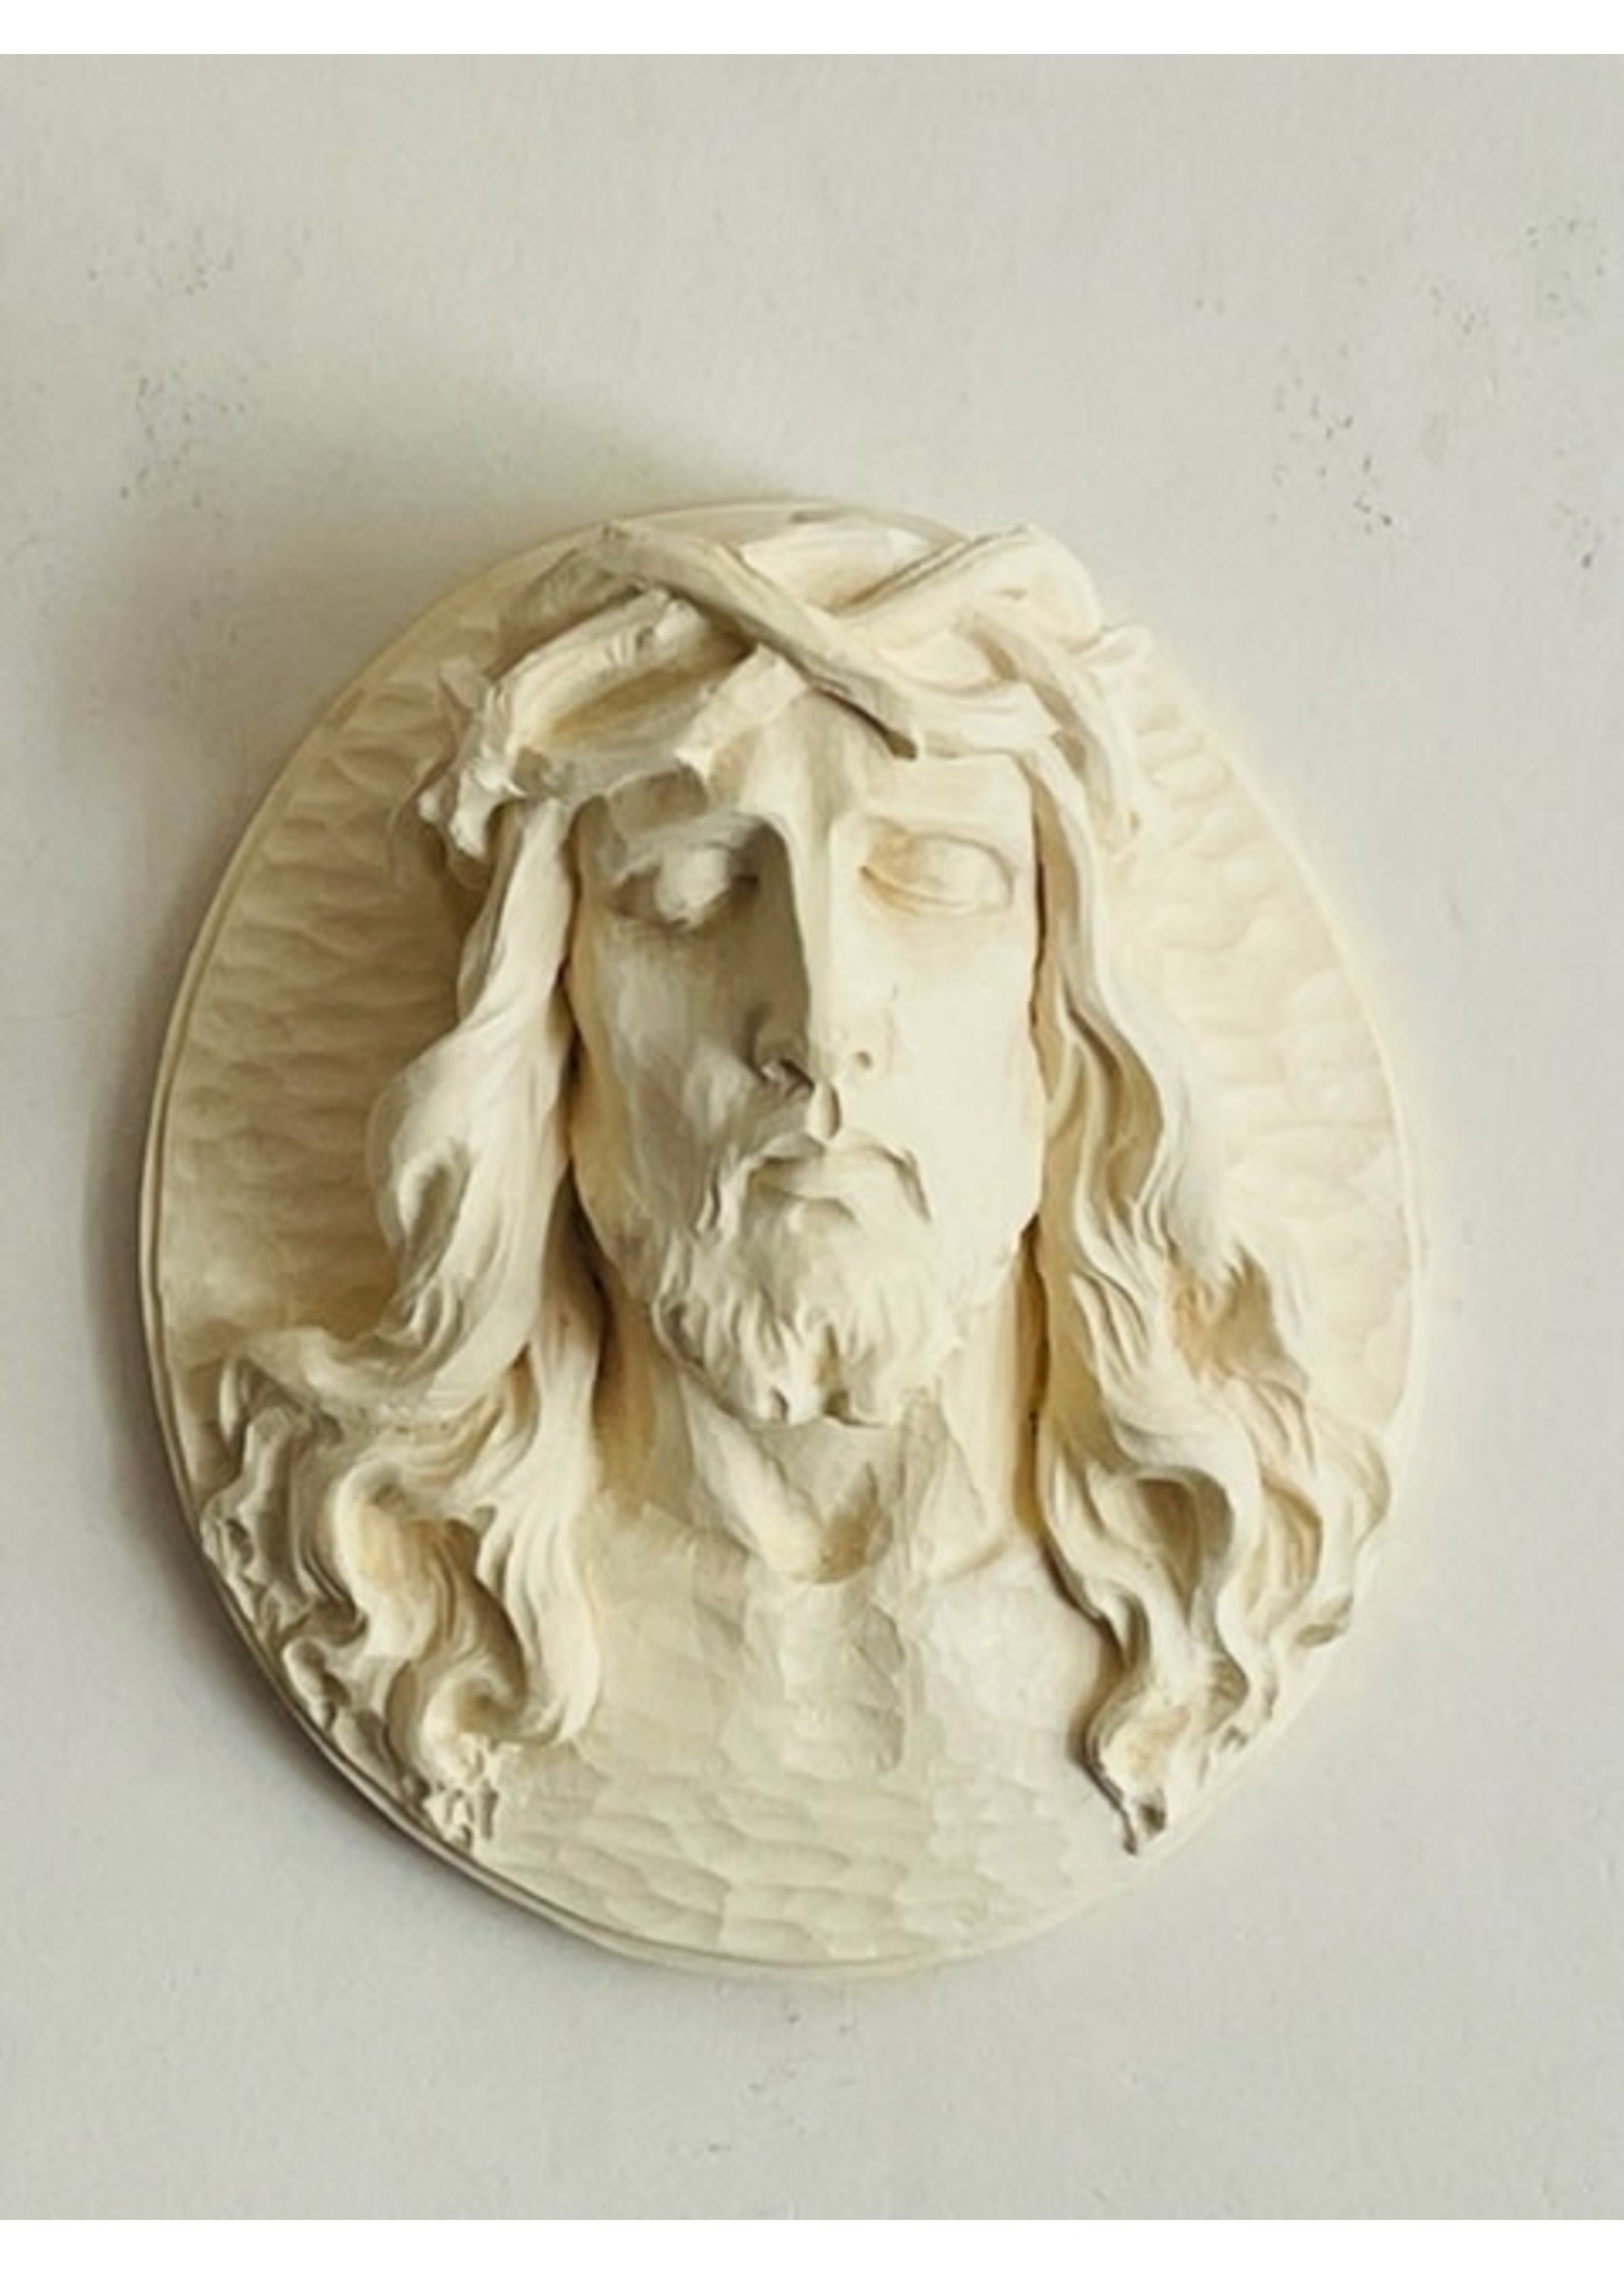 "Ecce Homo" - "Behold the Man" Holy Face wall mount